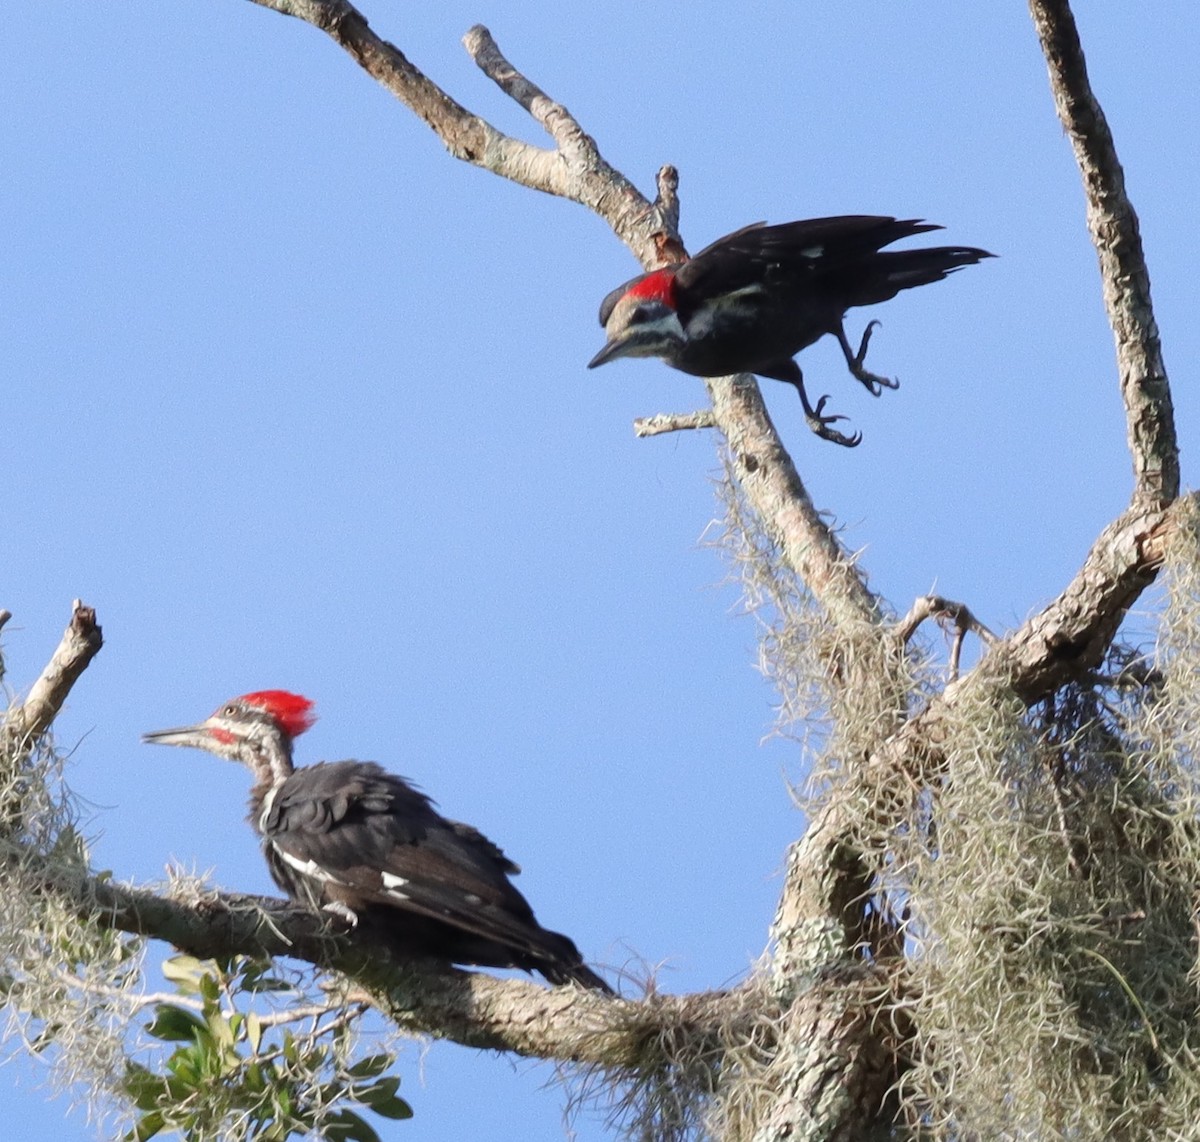 Male And Female Pileated Woodpeckers At Fenney Nature Trail